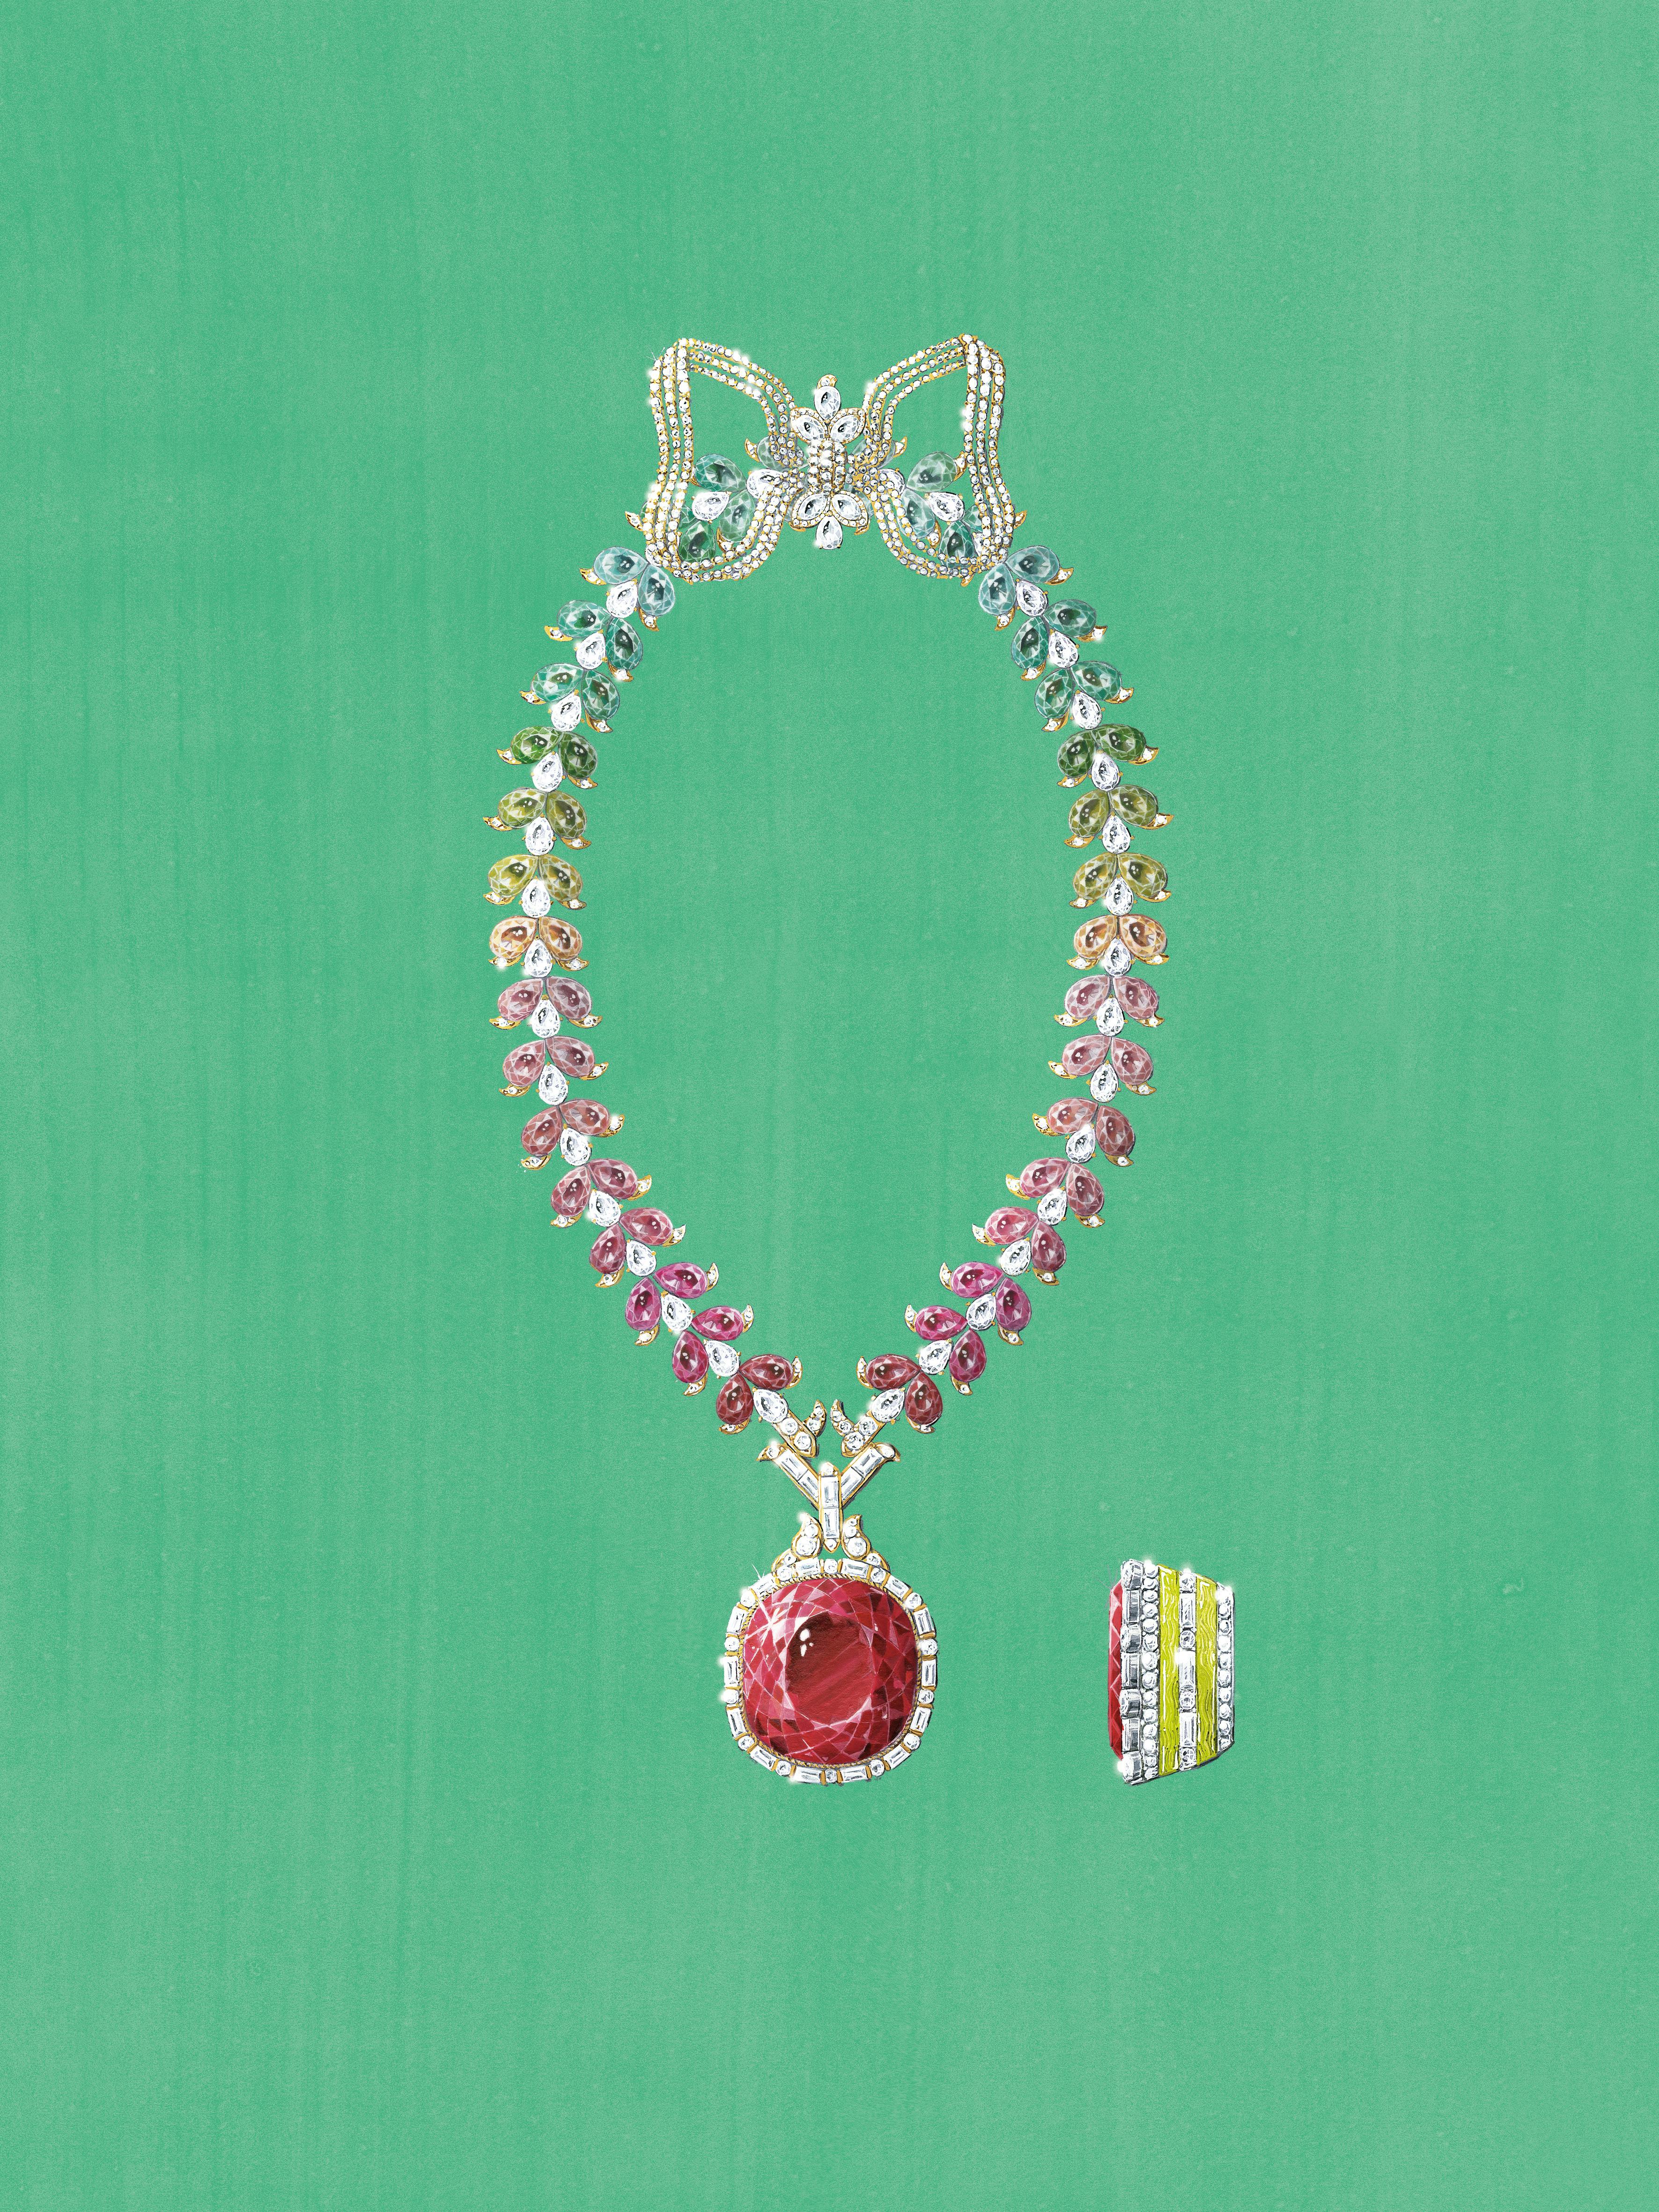 Gucci High Jewelry Allegoria Collection Inspired by Four Seasons – WWD